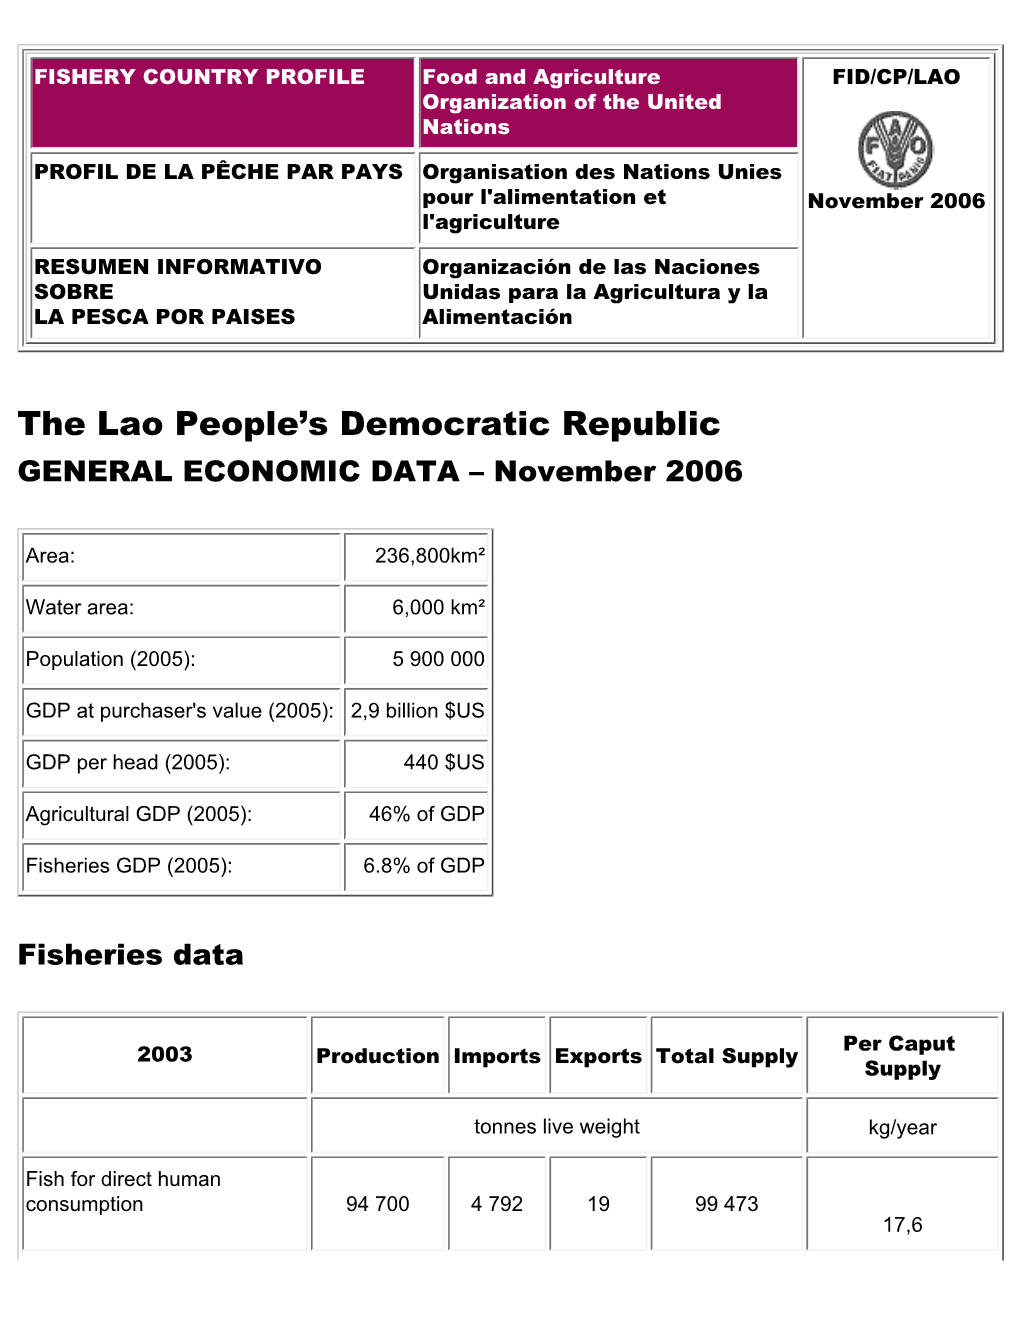 FAO Fisheries Country Profile